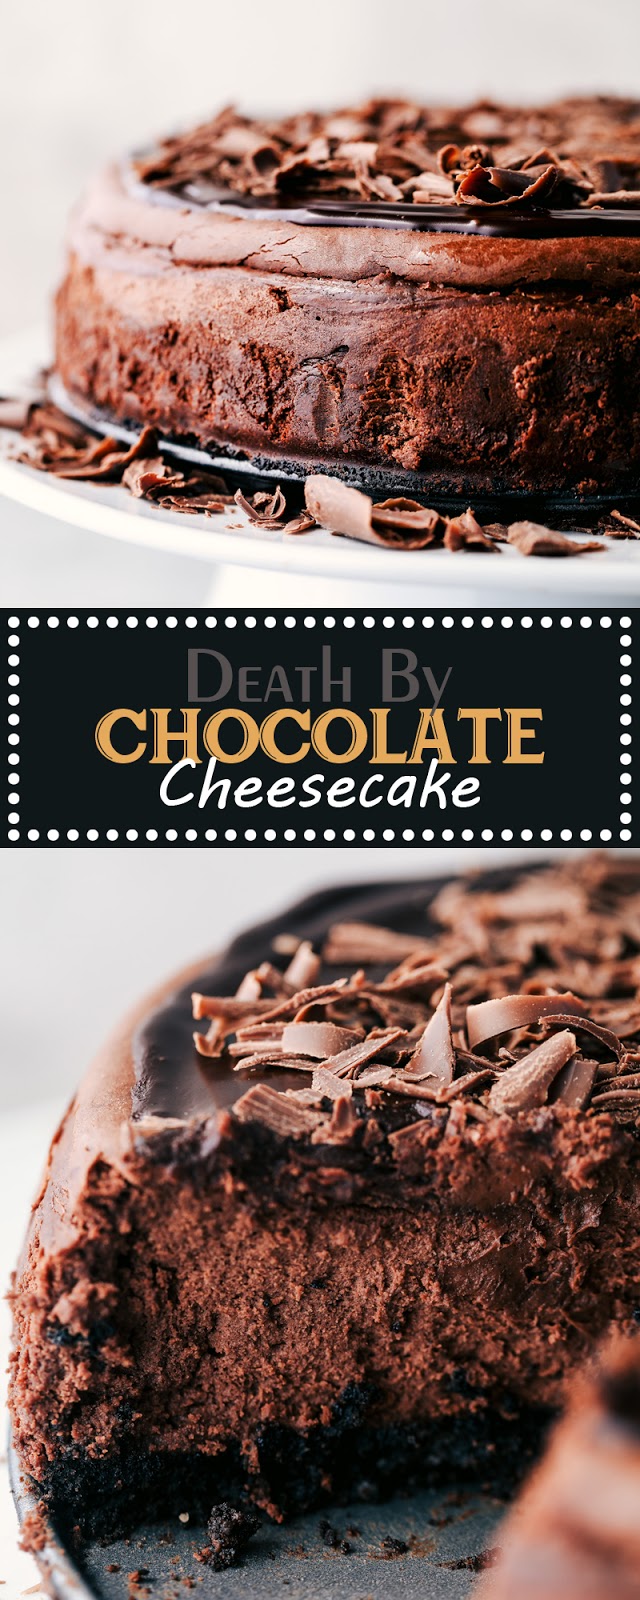 DEATH BY CHOCOLATE CHEESECAKE